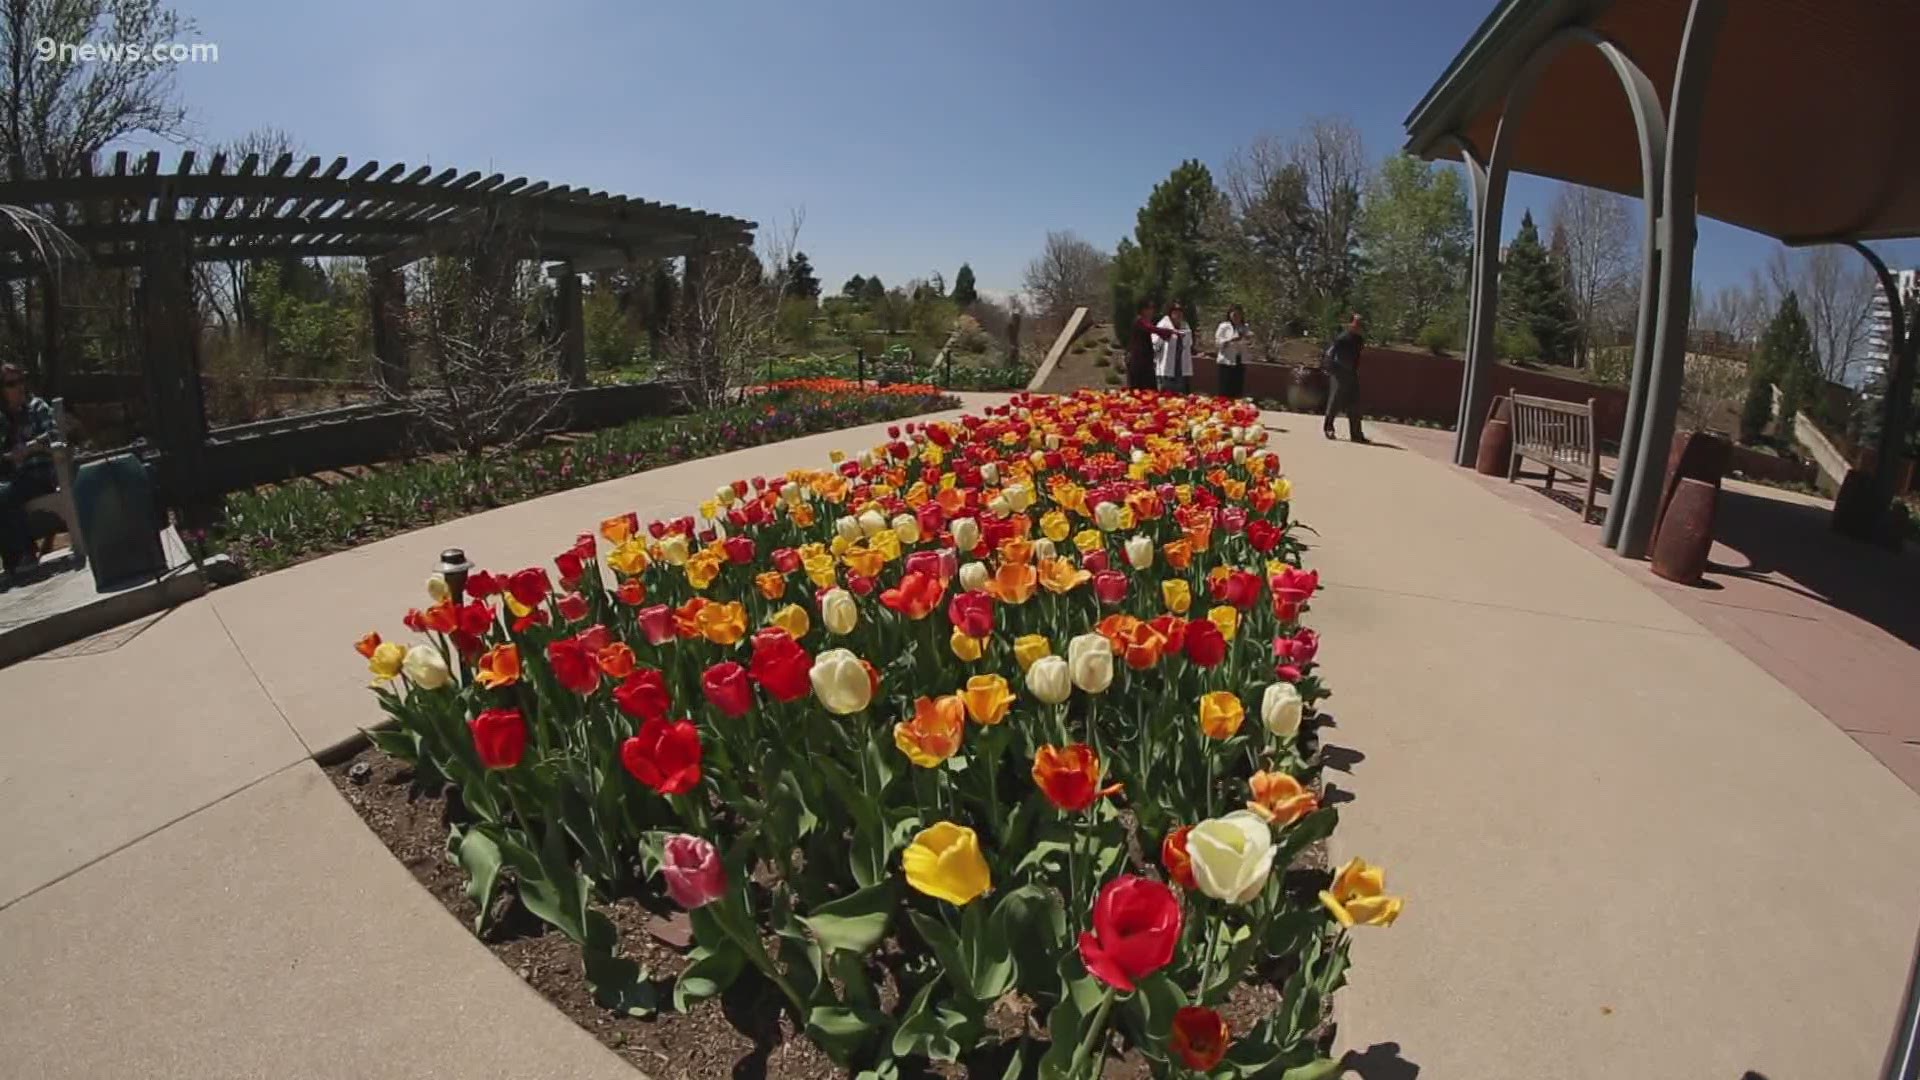 Denver Botanic Gardens will reopen on a limited basis on May 22, a few days before the state's current safer-at-home order is set to expire.